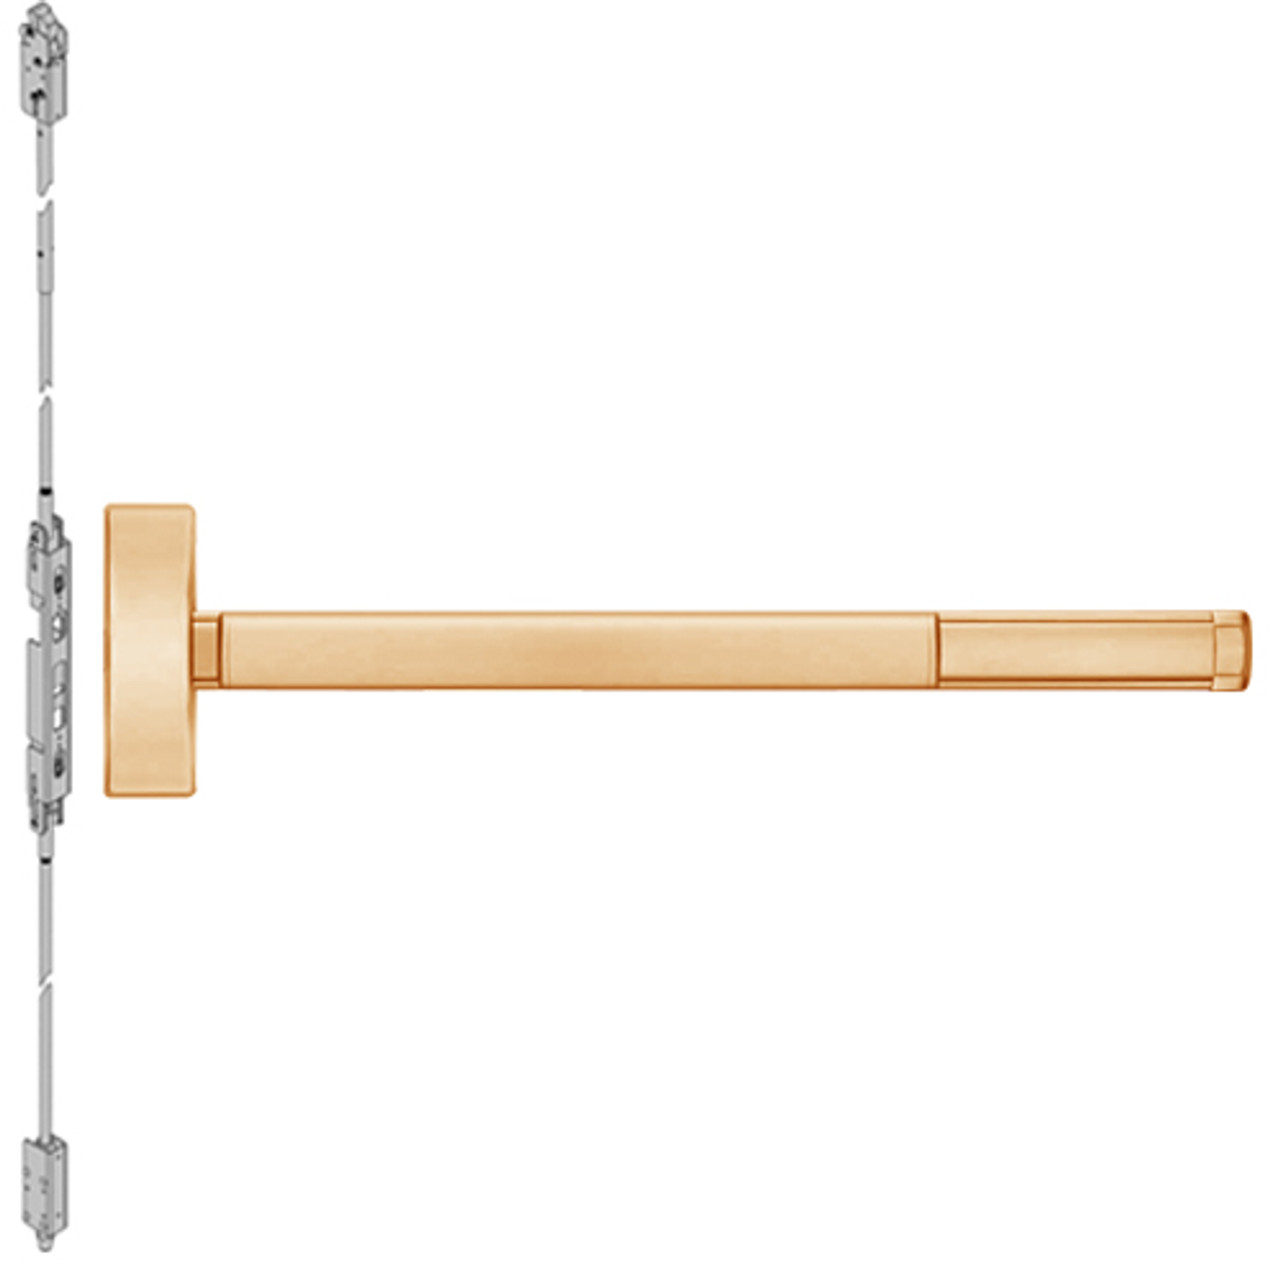 2801CD-612-36 PHI 2800 Series Non Fire Rated Concealed Vertical Rod Exit Device Prepped for Cover Plate in Satin Bronze Finish